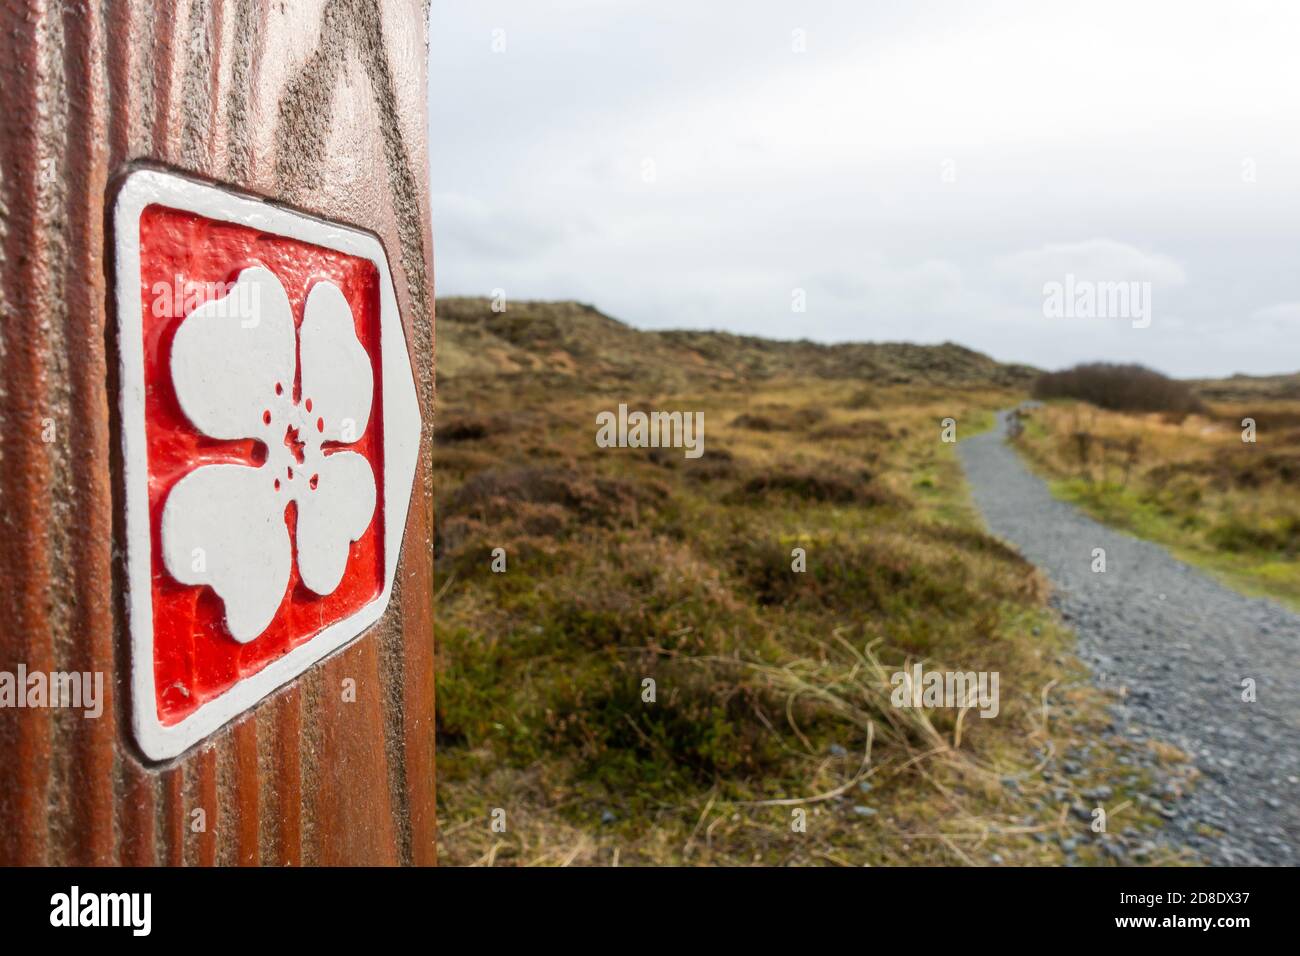 Pathway route sign within Forvie Sands National Nature Reserve near Collieston, Aberdeenshire, Scotland, UK Stock Photo